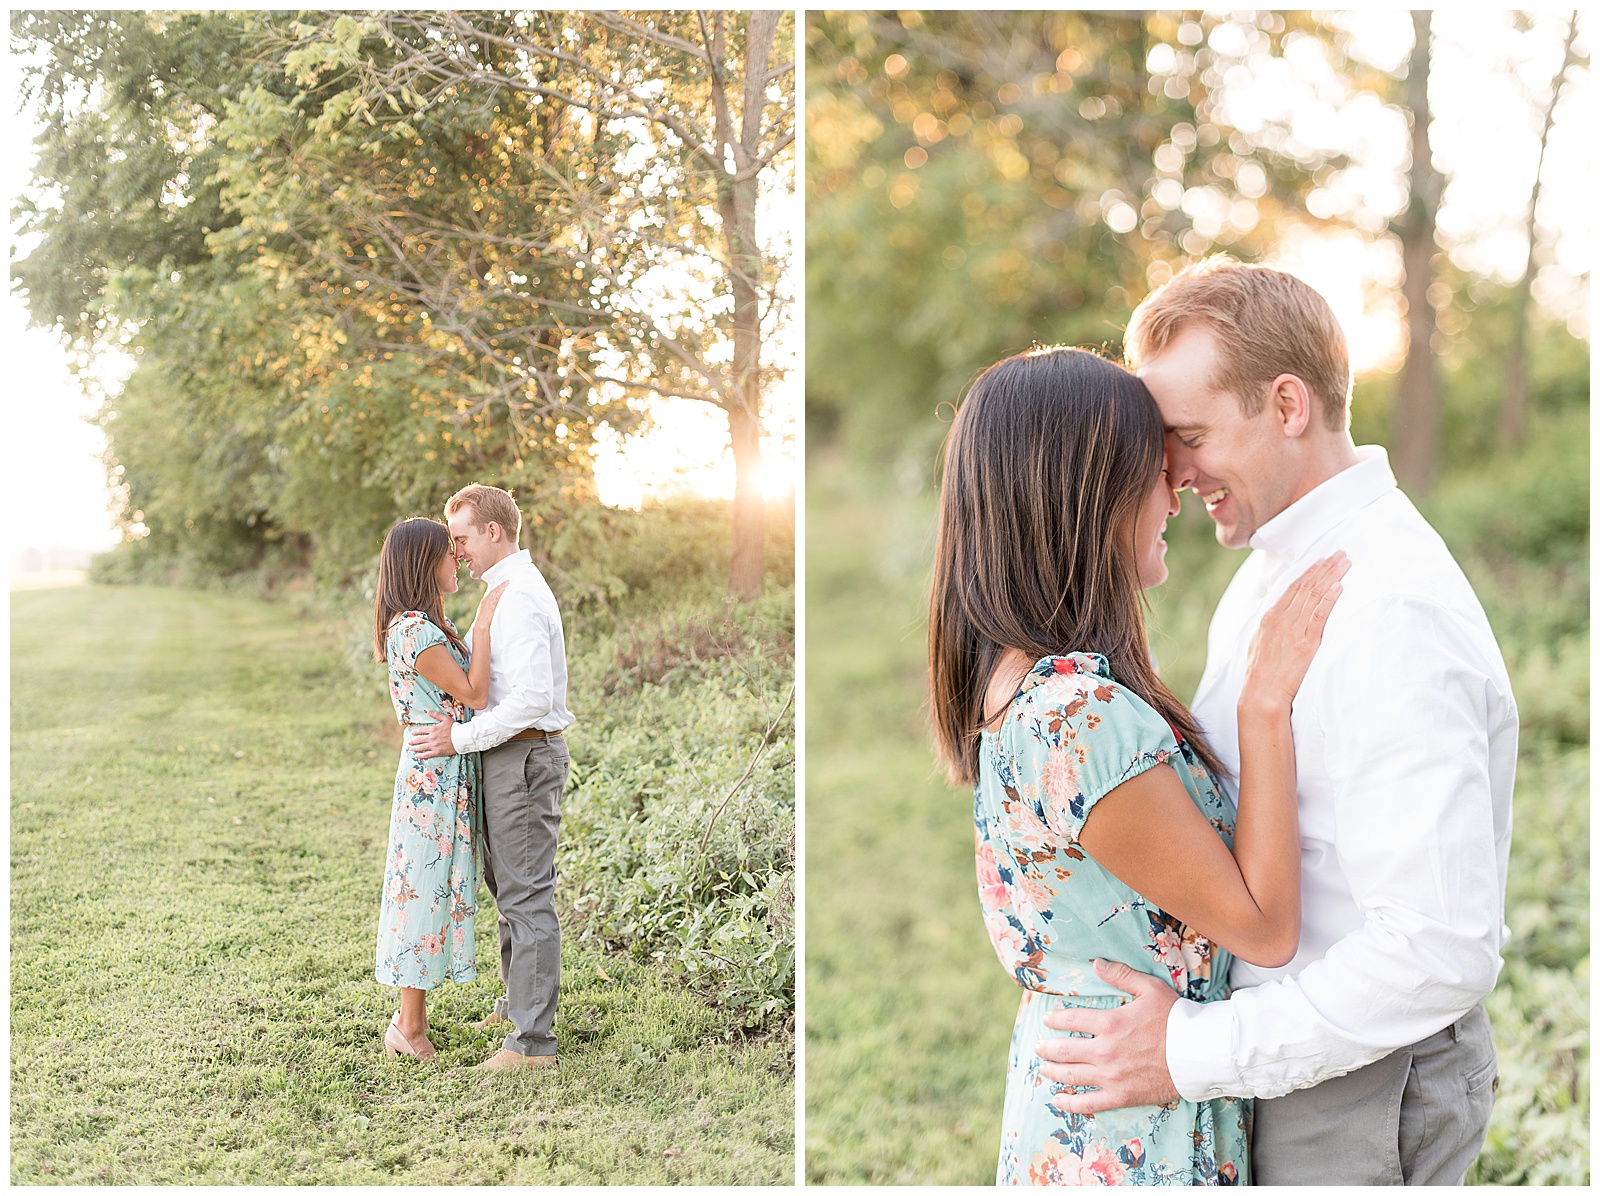 couple forehead to forehead with golden light shining through trees behind